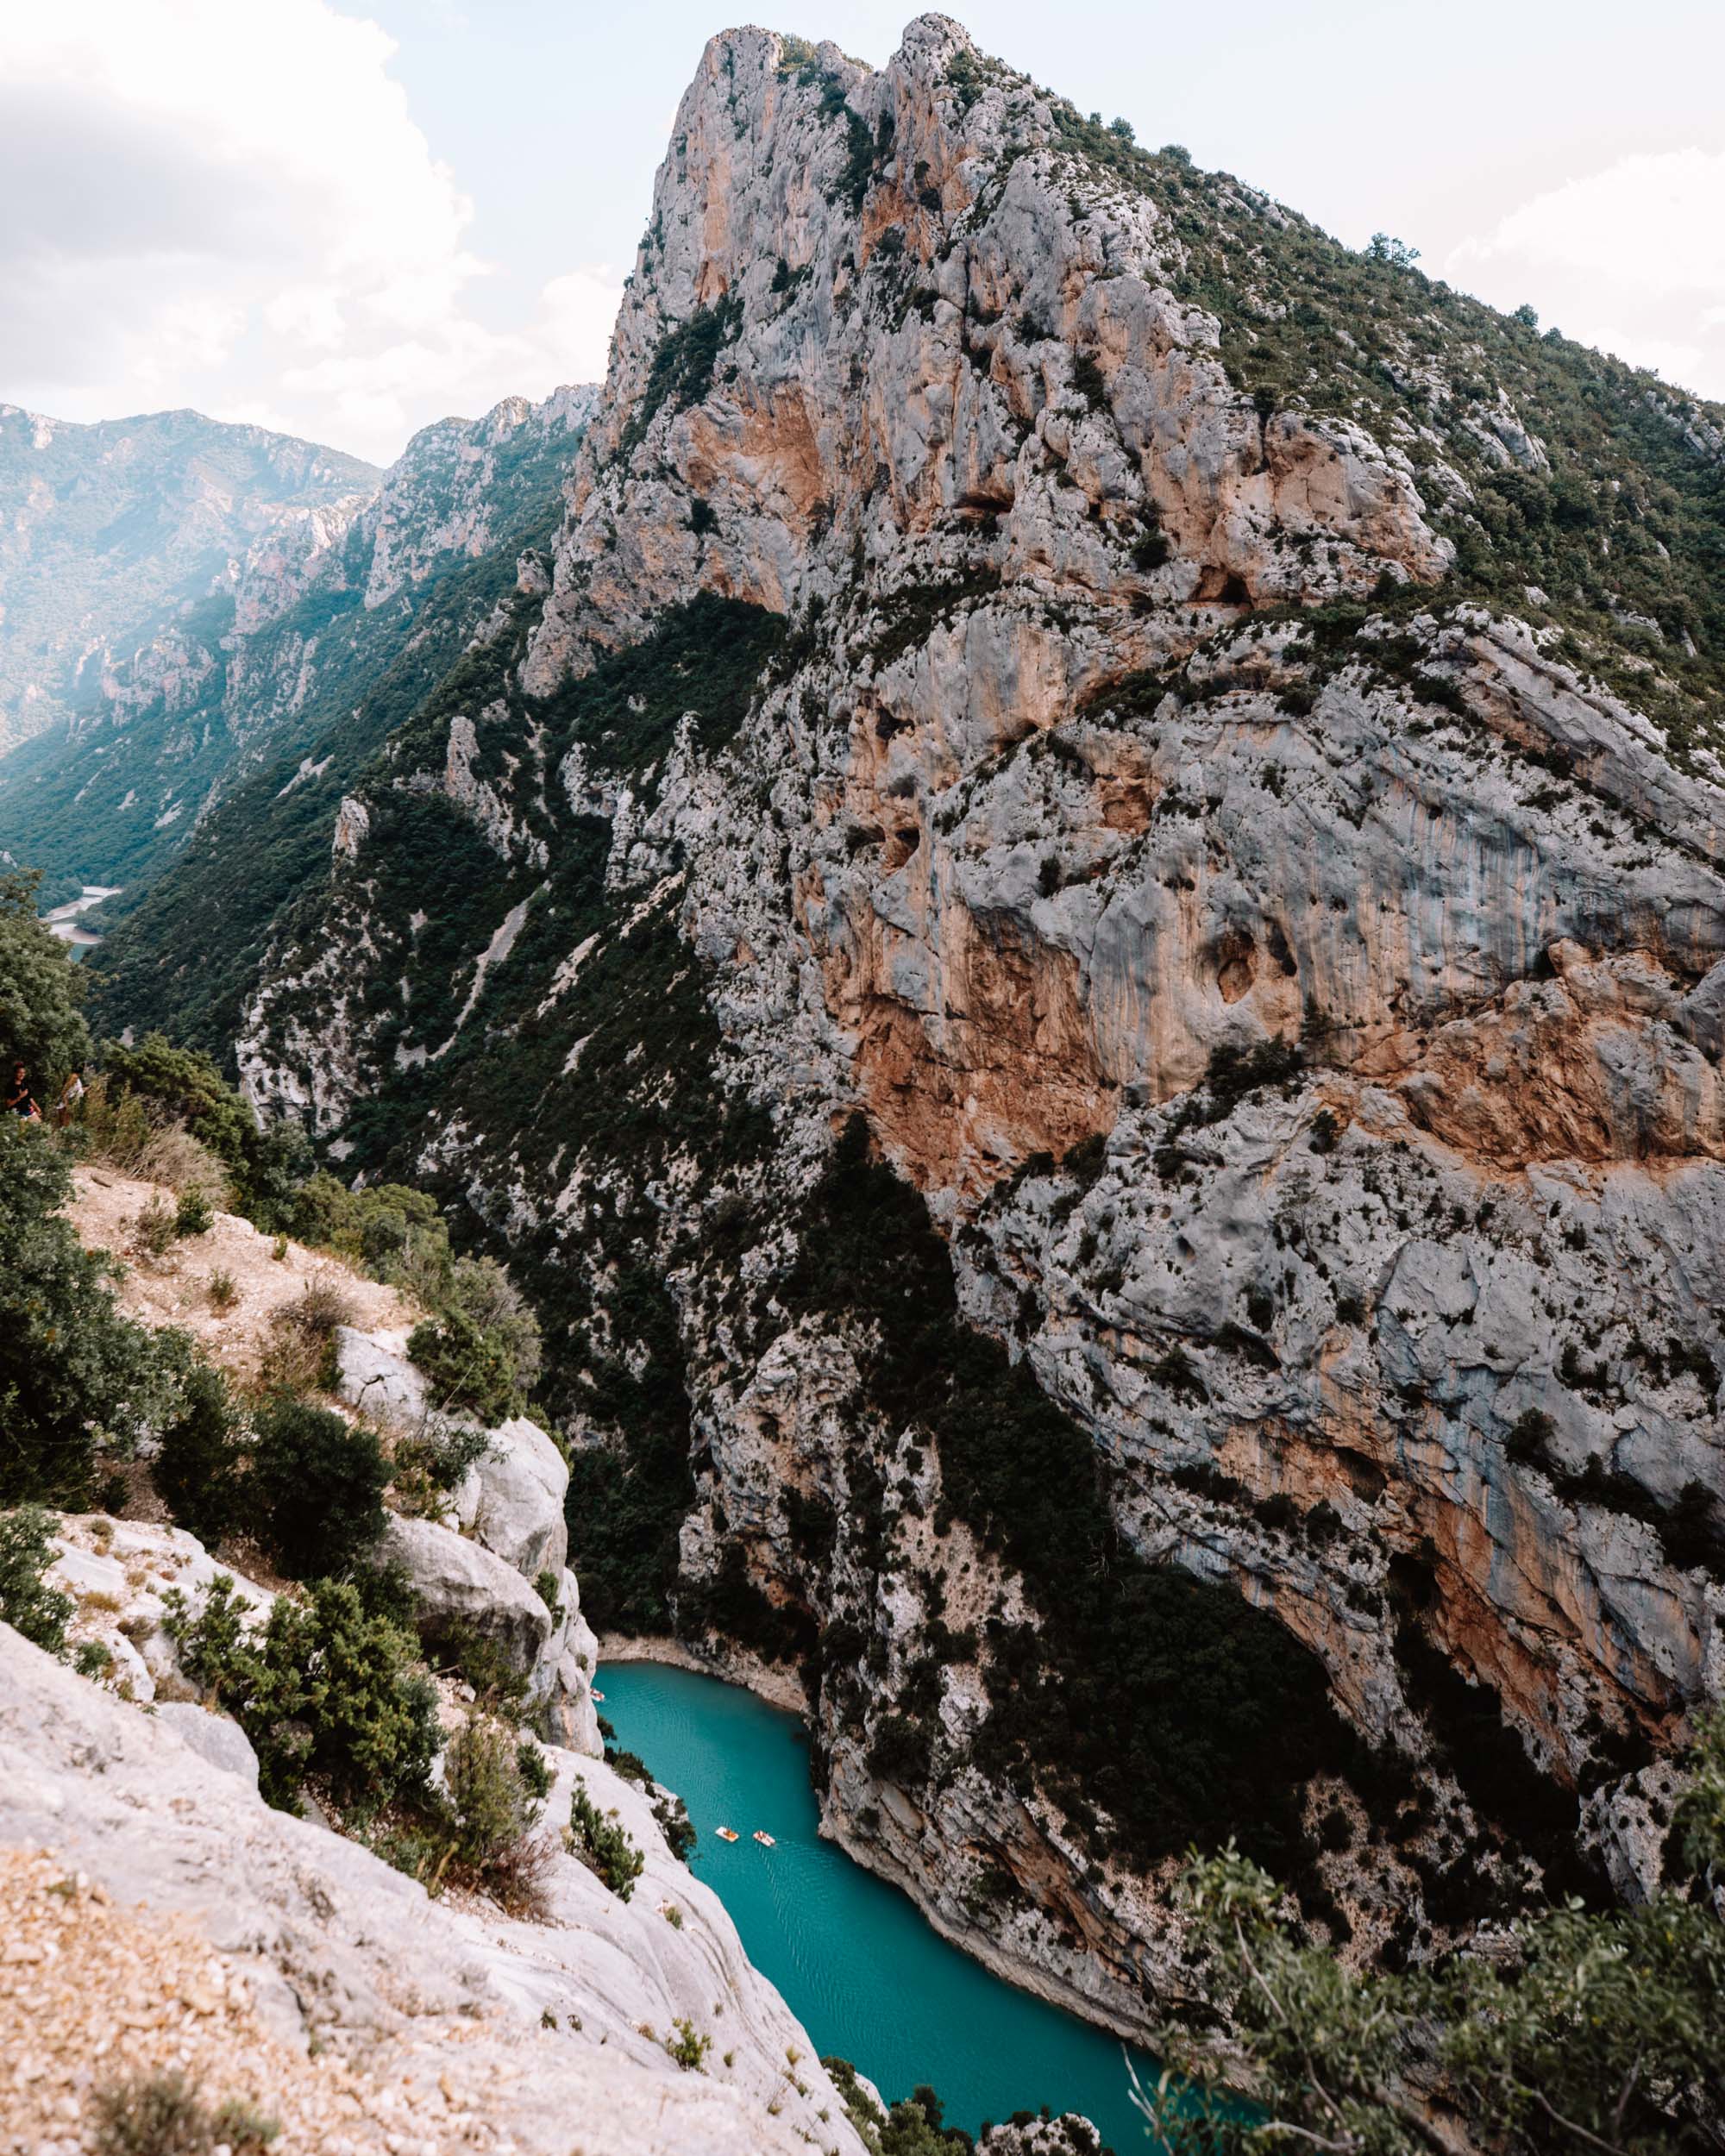 Gorges du Verdon drive in the South of France via Find Us Lost